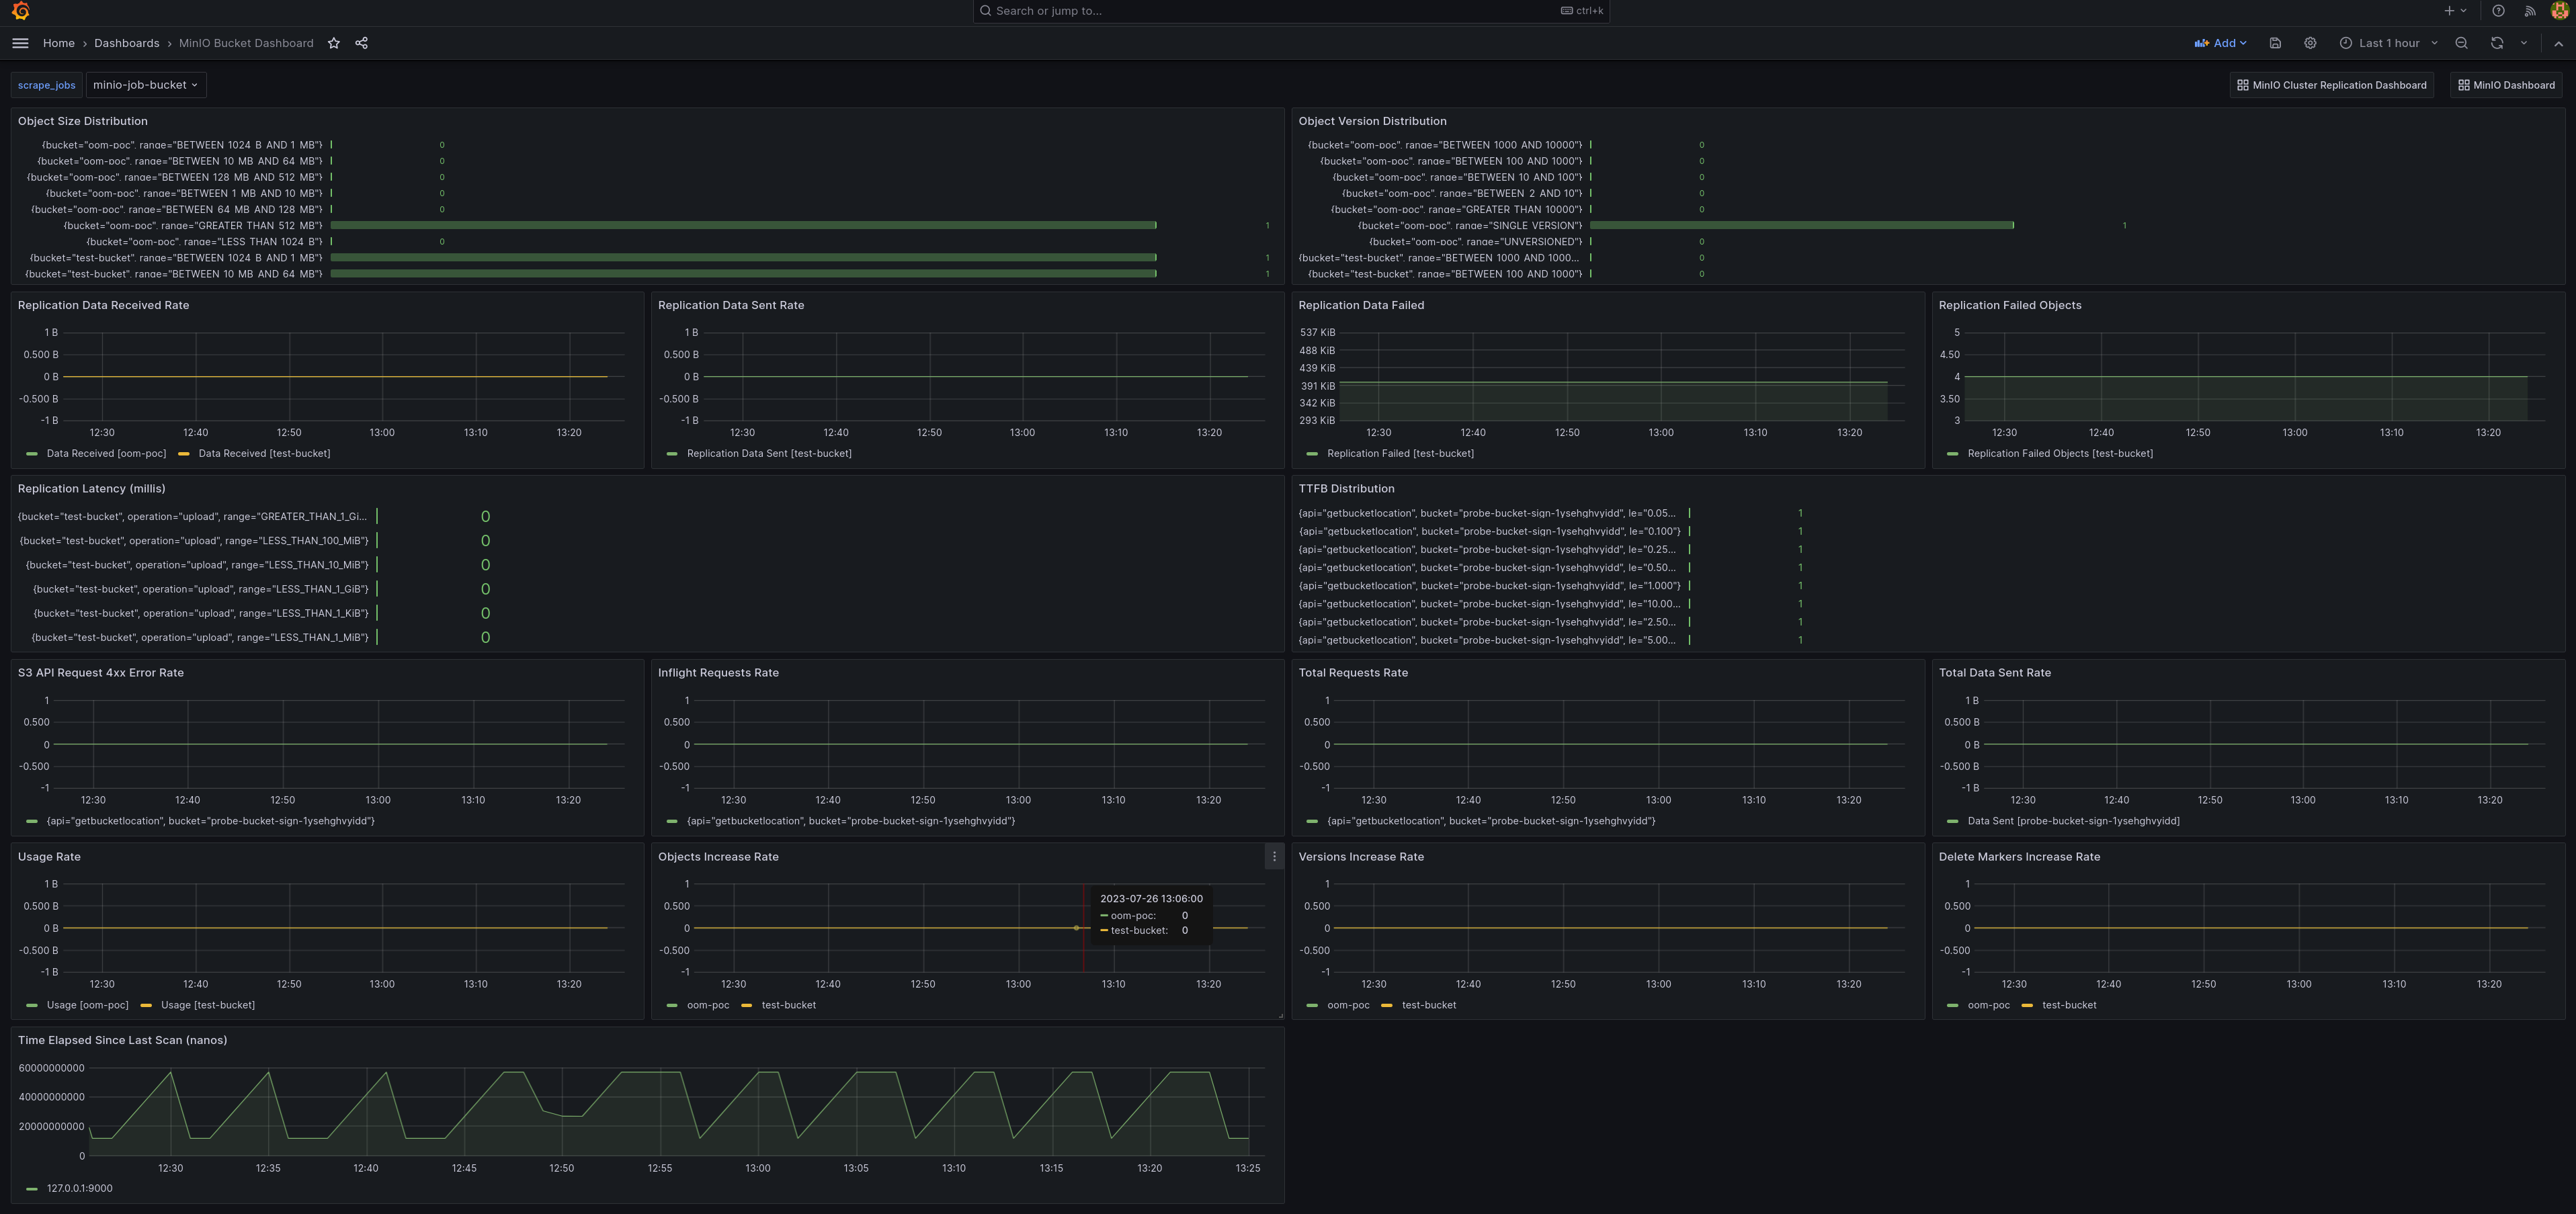 A sample of the MinIO Grafana dashboard showing many different captured metrics for MinIO buckets.